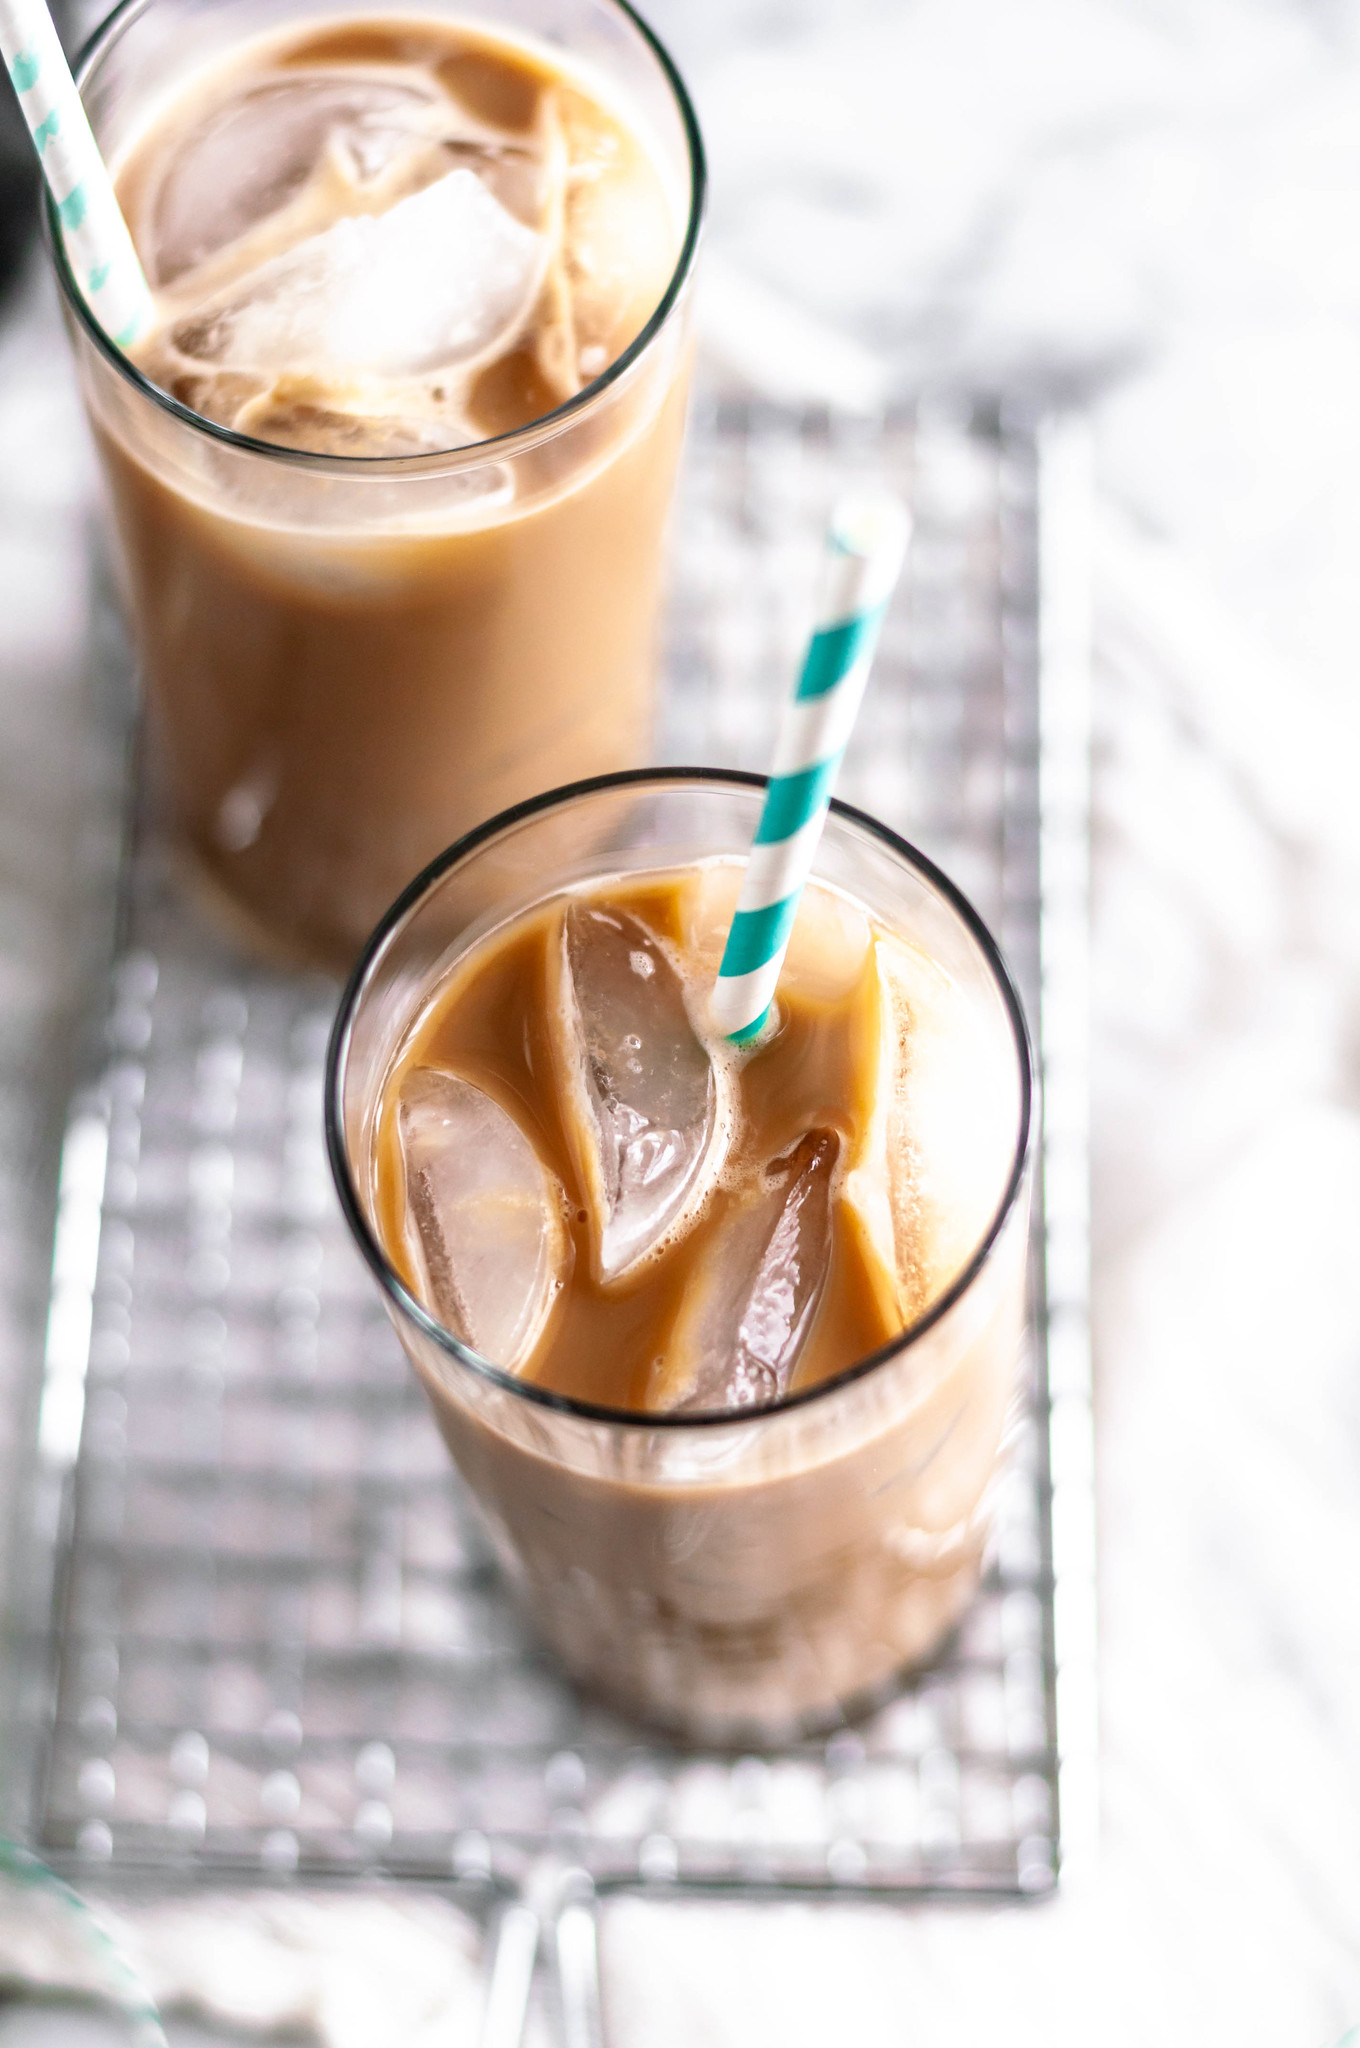 Meet your new morning favorite. Iced Irish Coffee includes a simple homemade (non-alcoholic) Irish creamer, cold brew coffee and a little brown sugar.